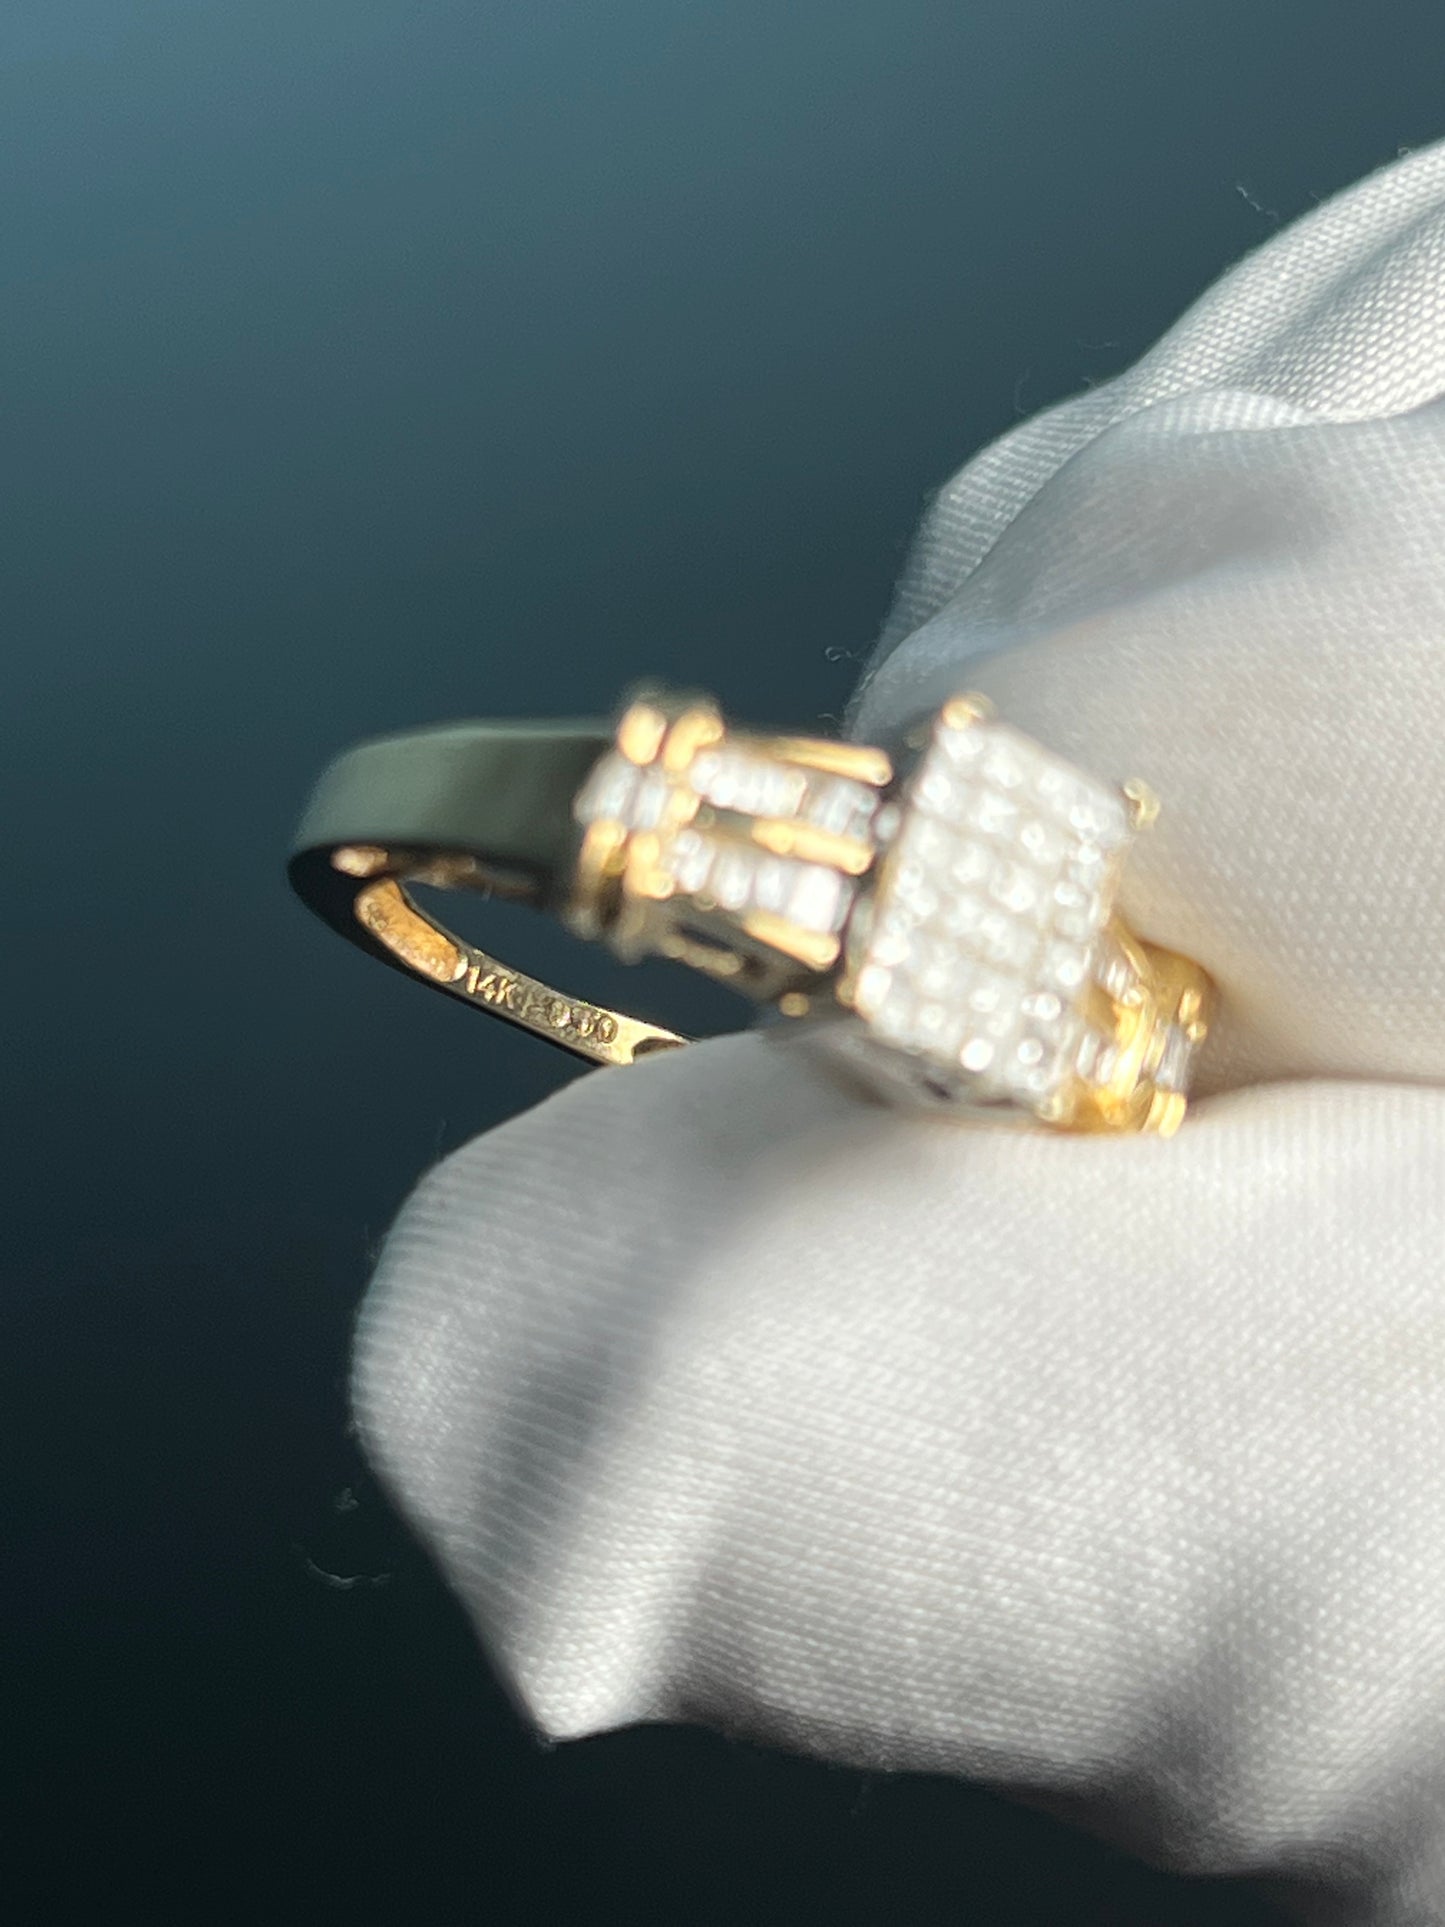 Invisible Set Diamond Ring in 14k Gold